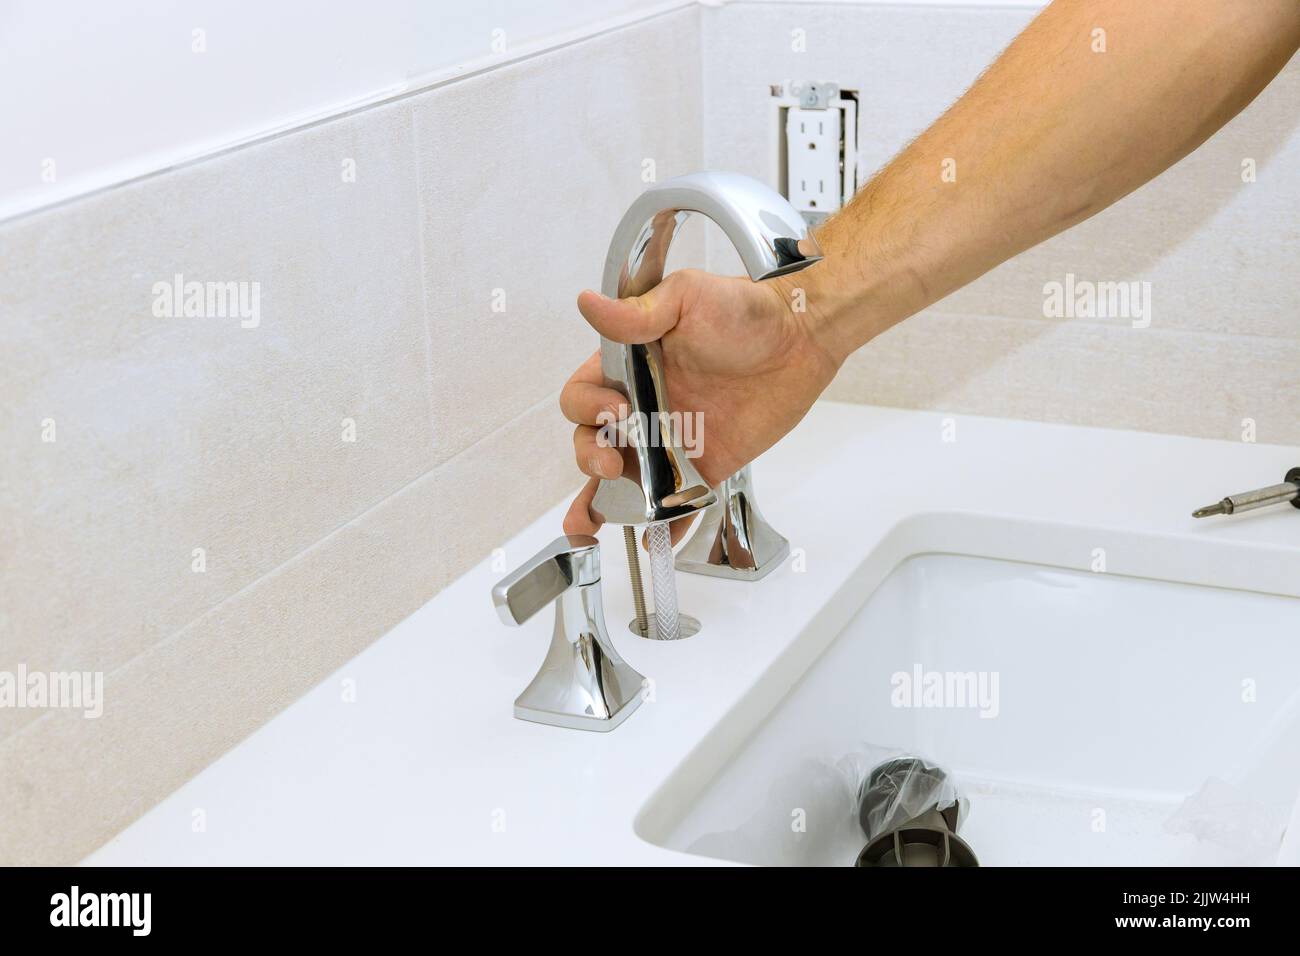 Plumber assemble and install water faucet in the bathroom Stock Photo